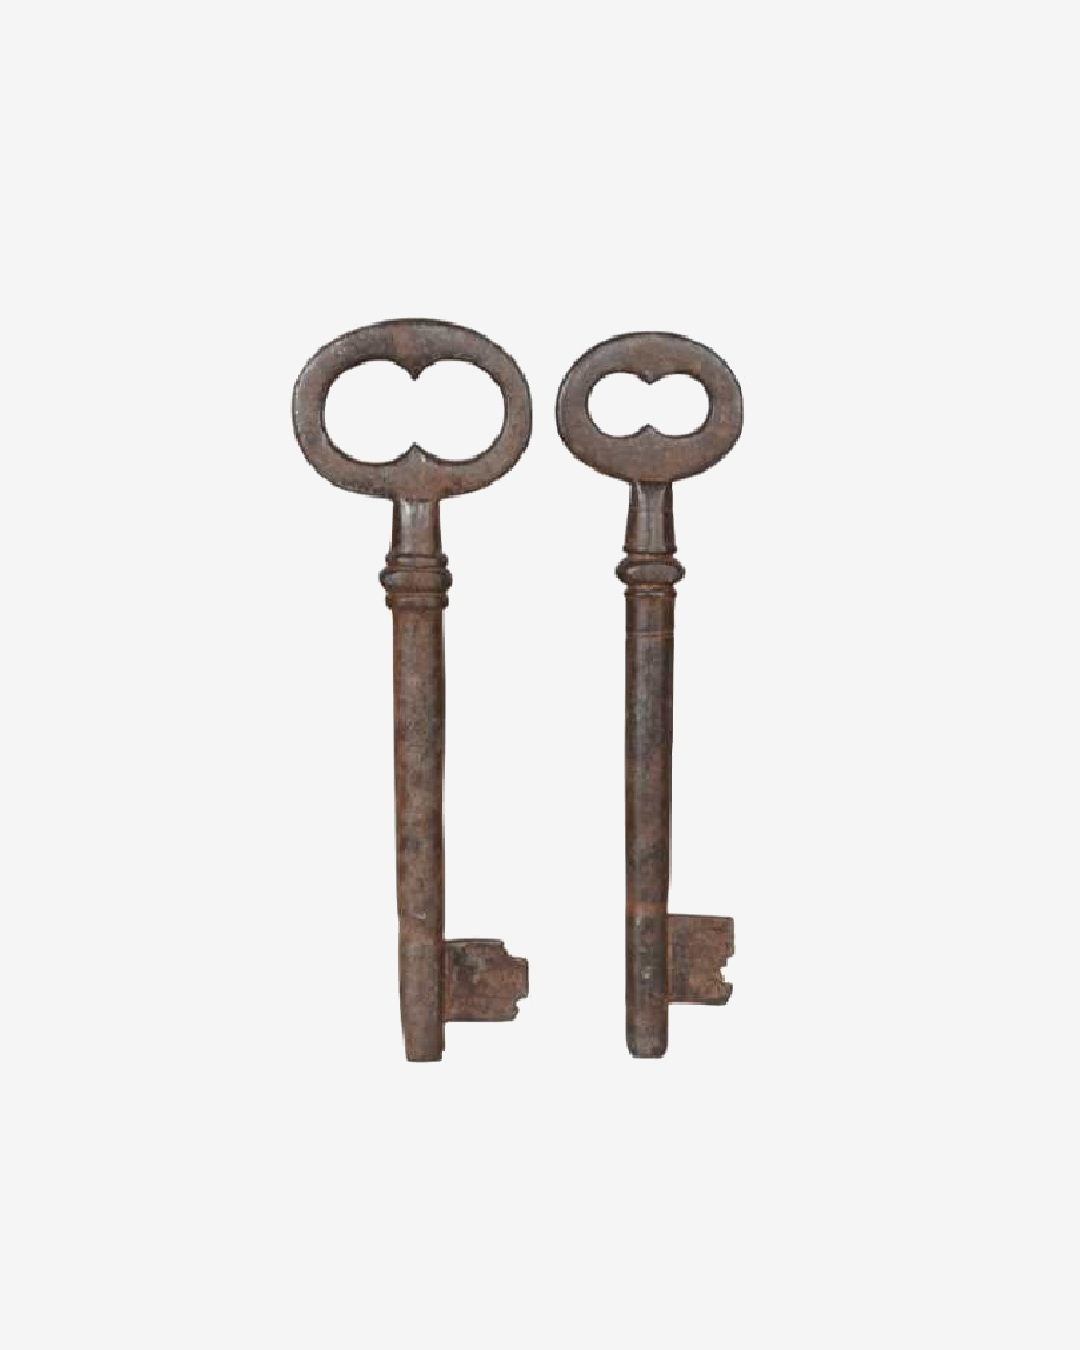 Two old iron keys